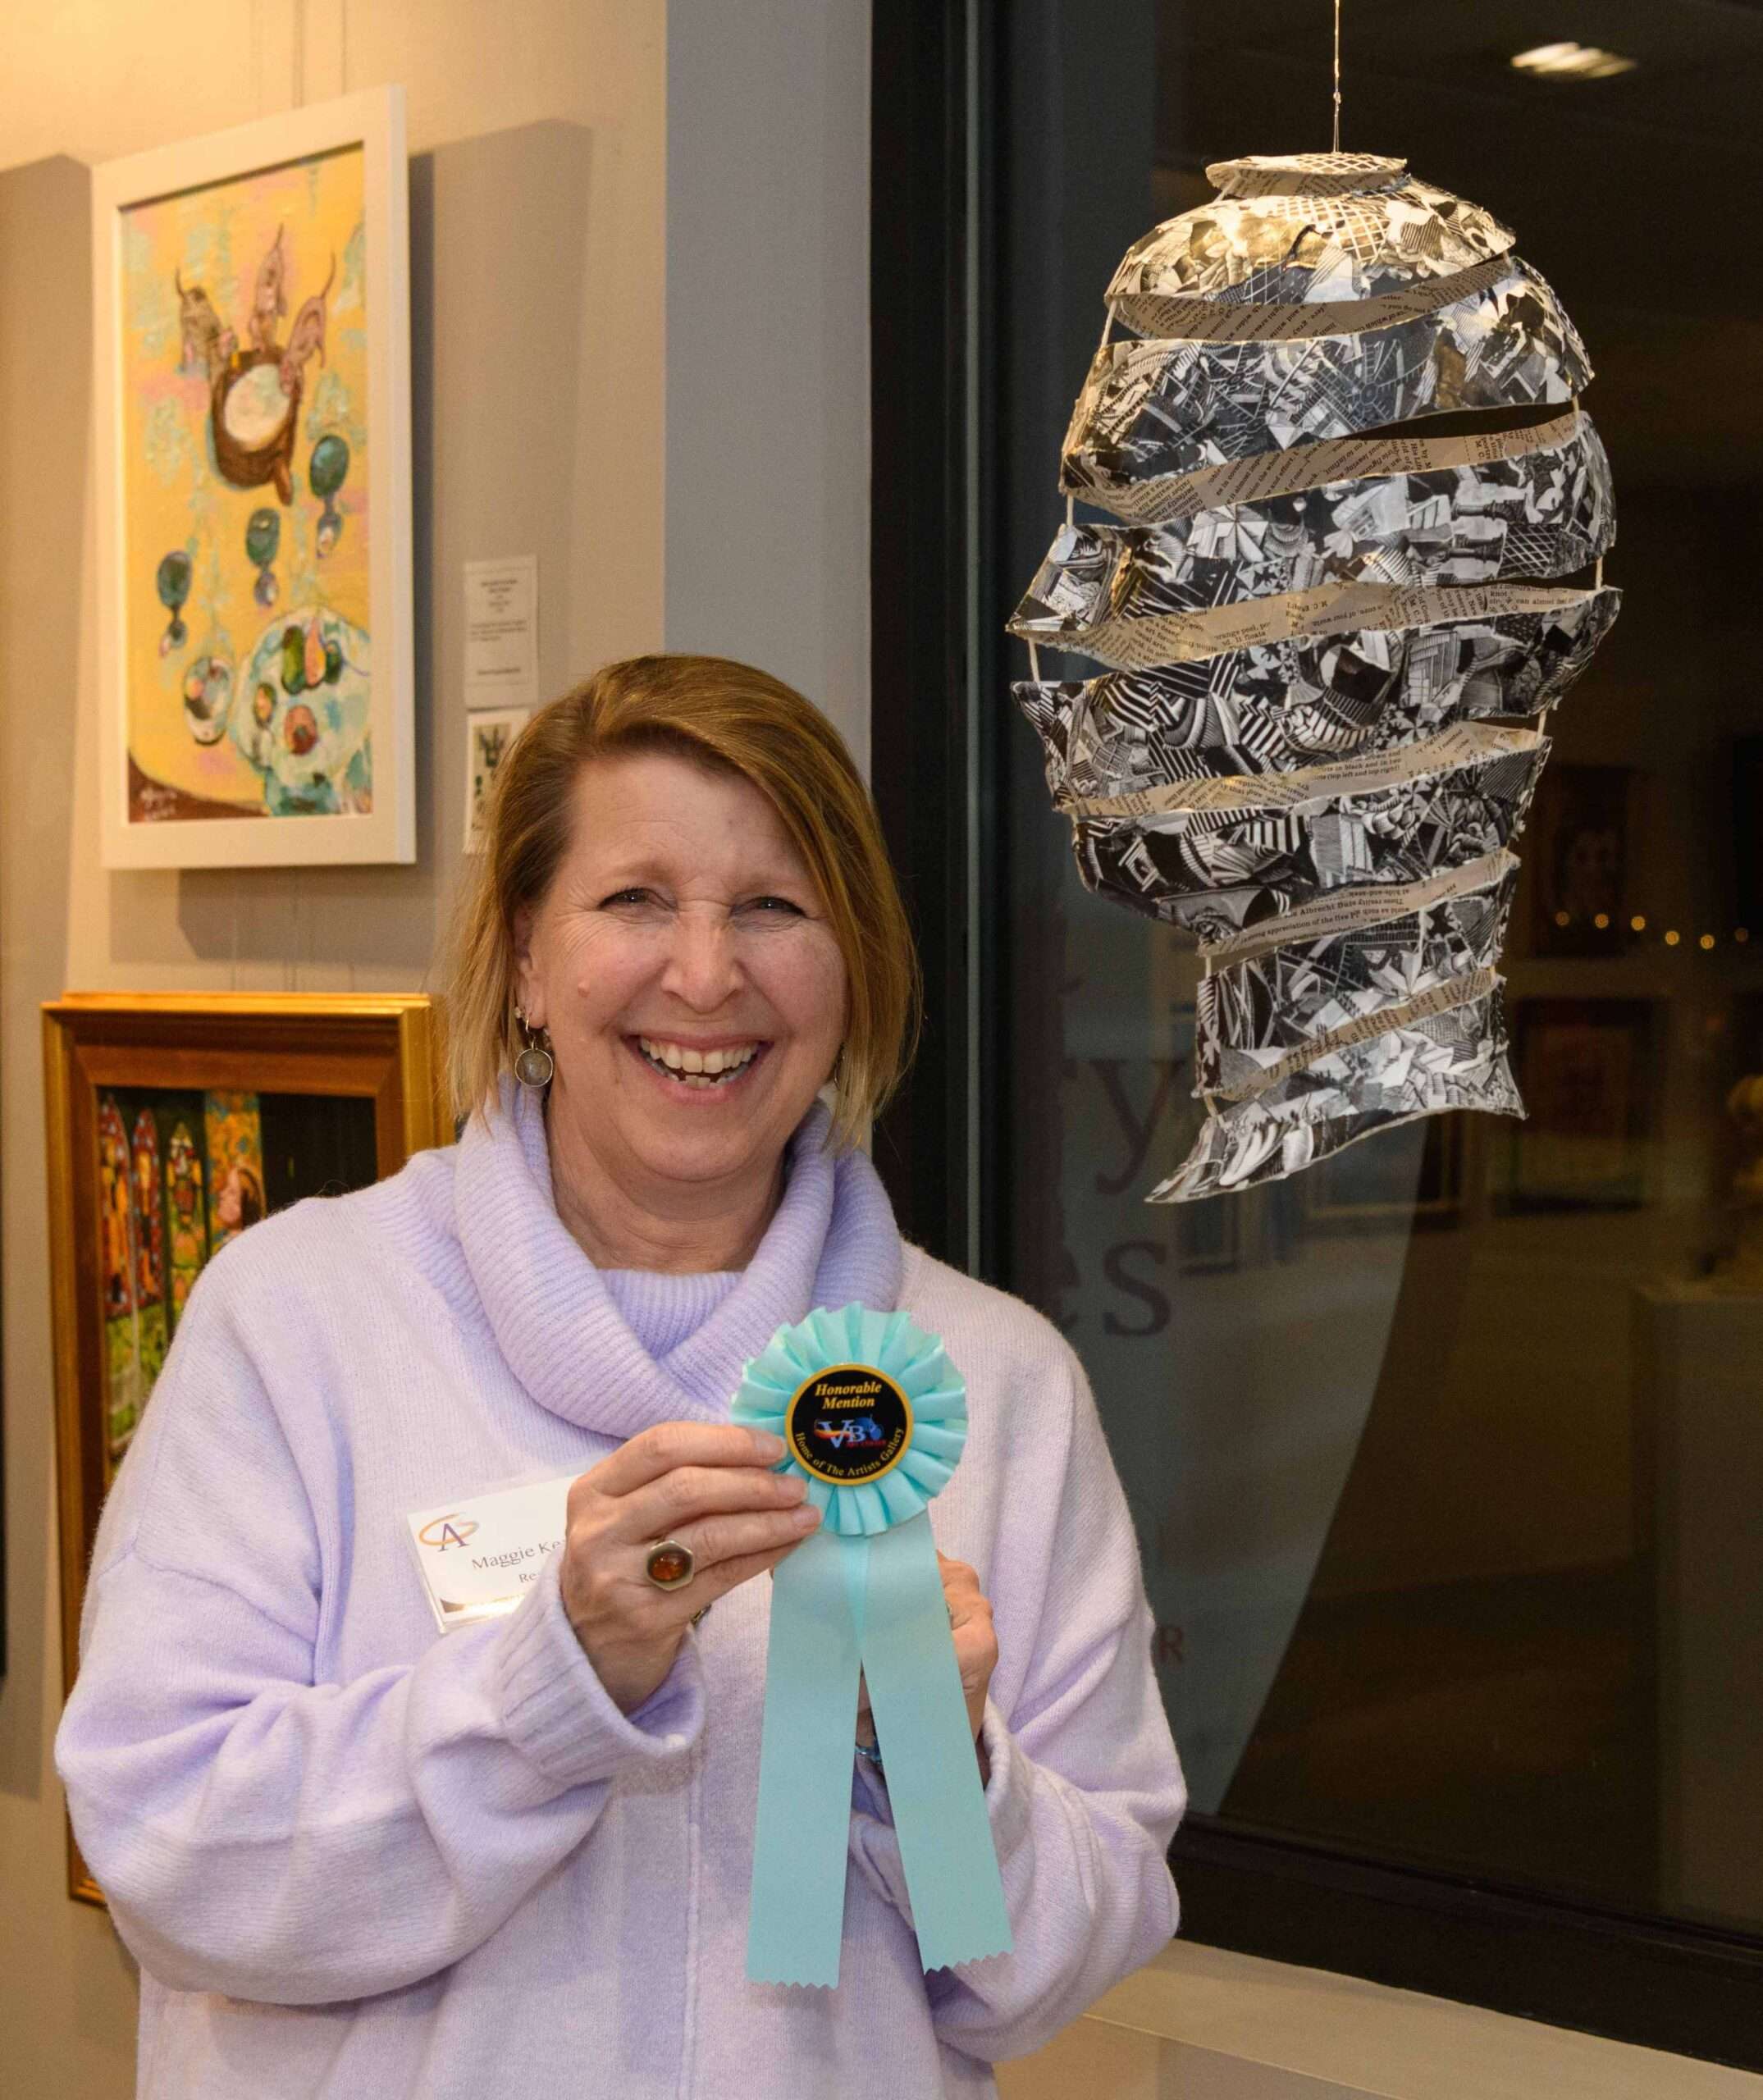 Maggie Kerrigan poses with her honorable mention award and her artwork, "The Escher Head"